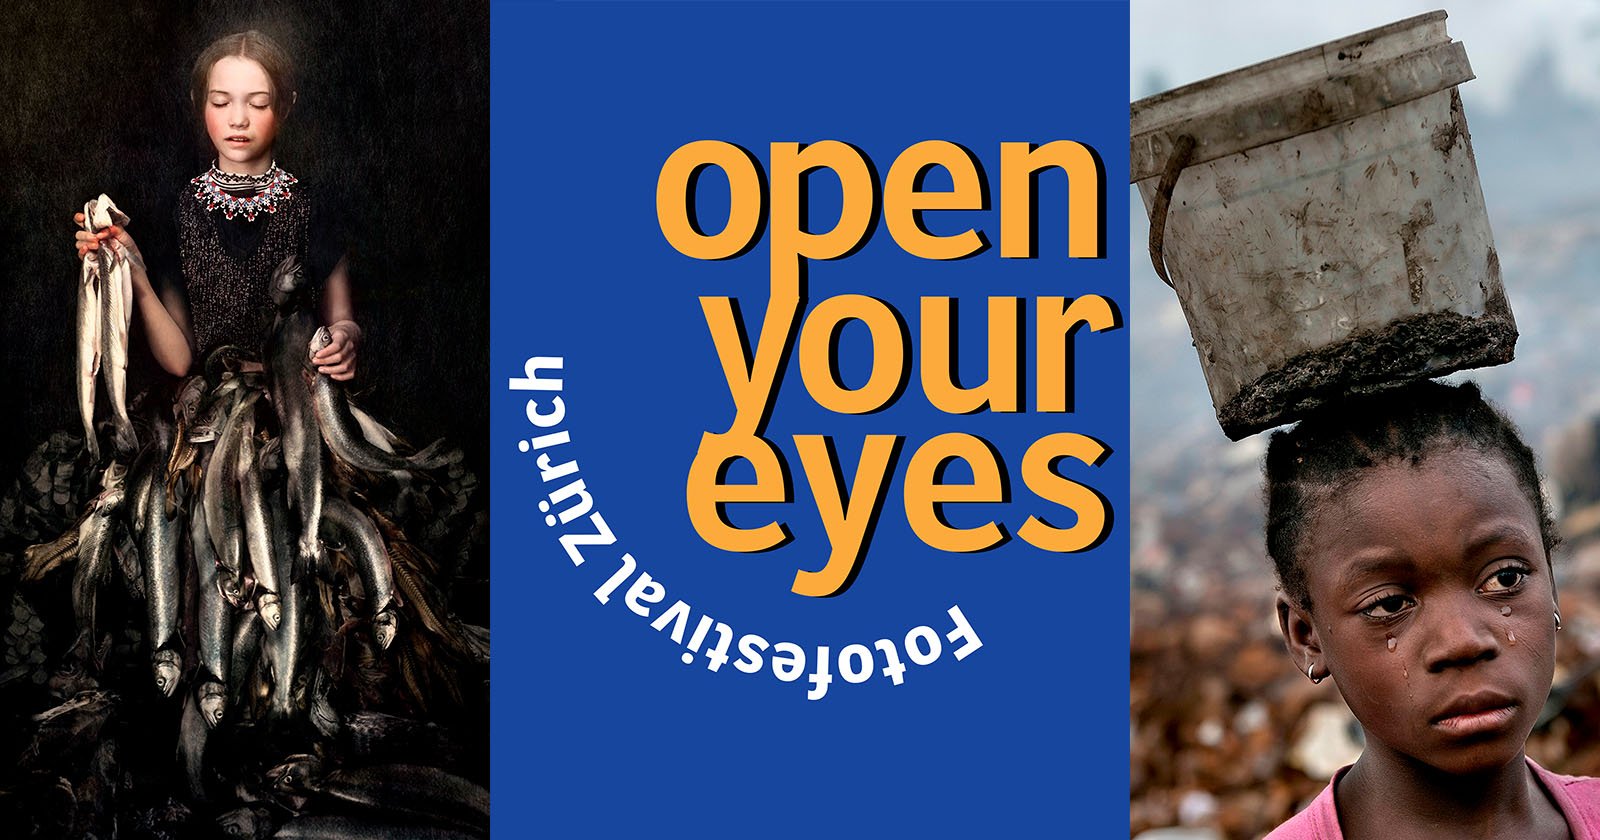 Open Your Eyes Fotofestival in Zurich Shines Light on UN Sustainability Goals